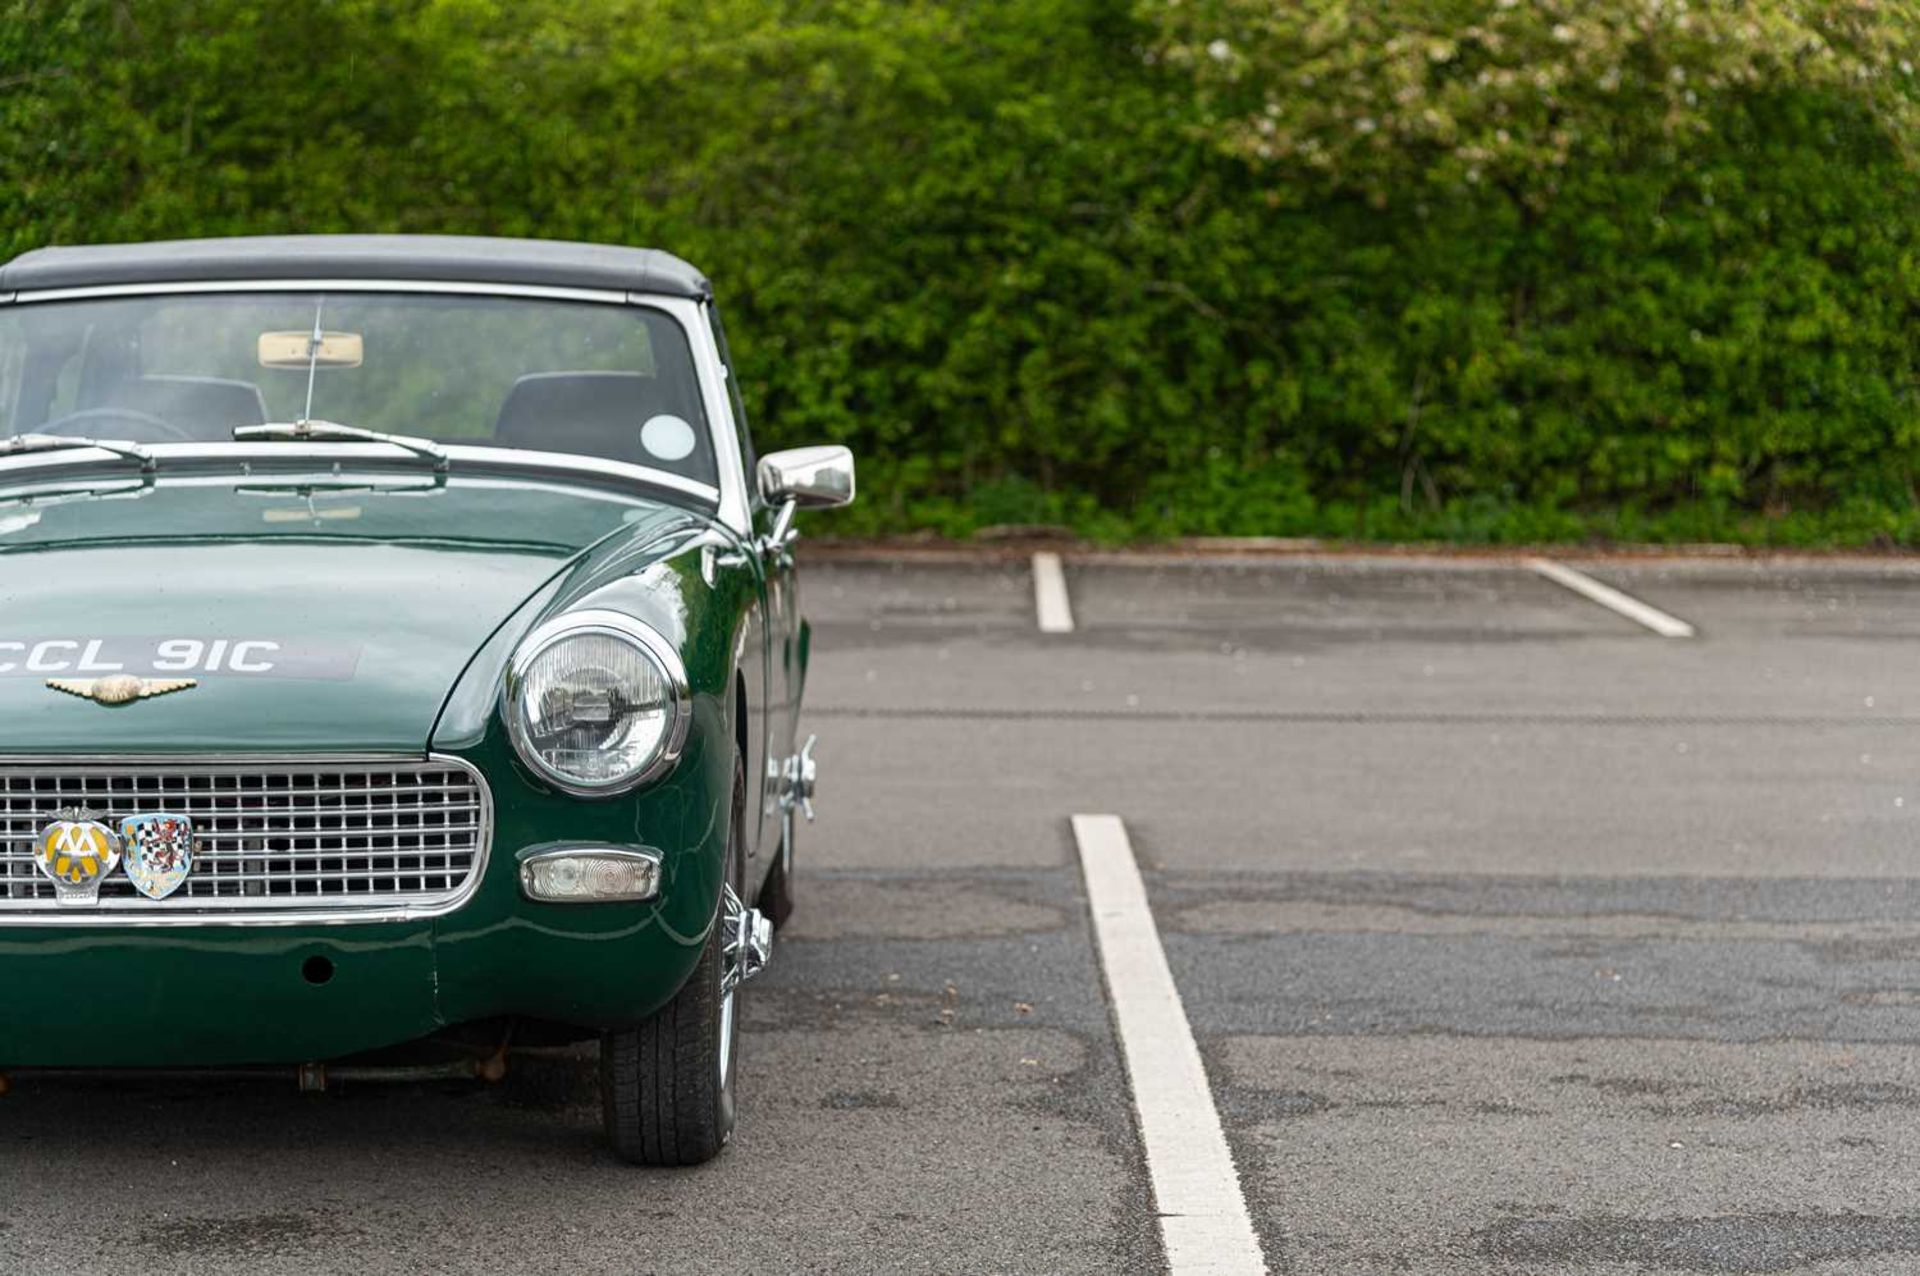 1965 Austin-Healey Sprite Formerly the property of British Formula One racing driver David Piper - Image 19 of 71